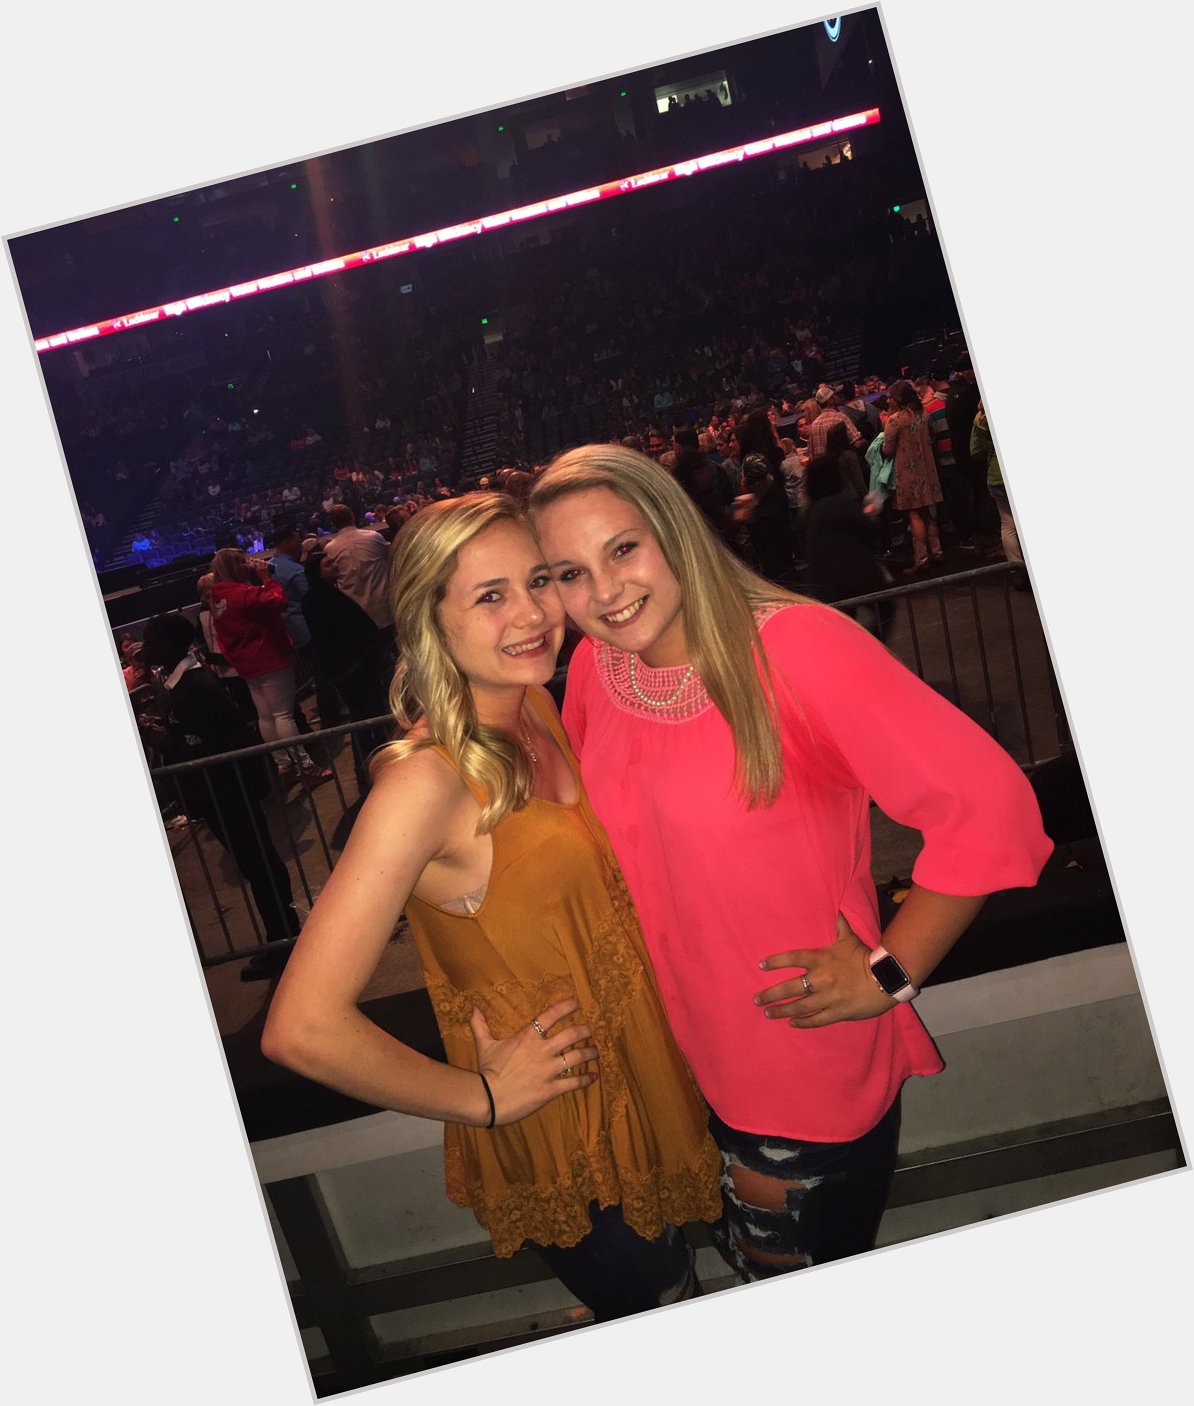 Happy birthday to my luke bryan concert buddy! i hope you have the best day ever! ily!   